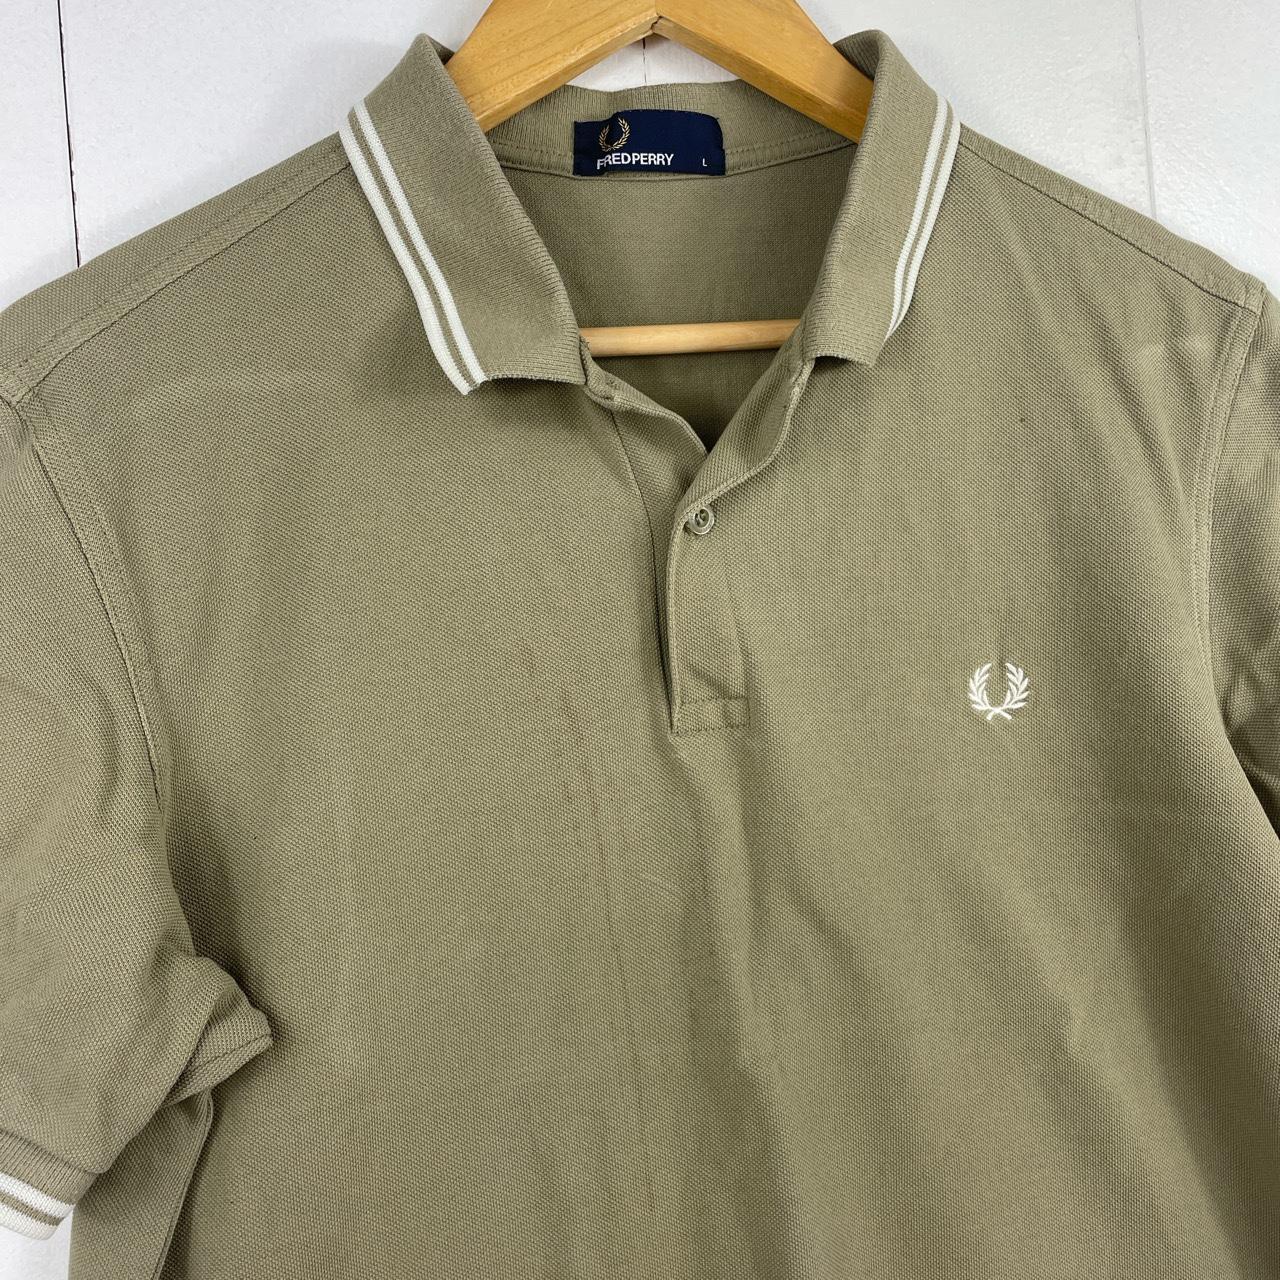 Fred Perry polo shirt in khaki, with classic... - Depop